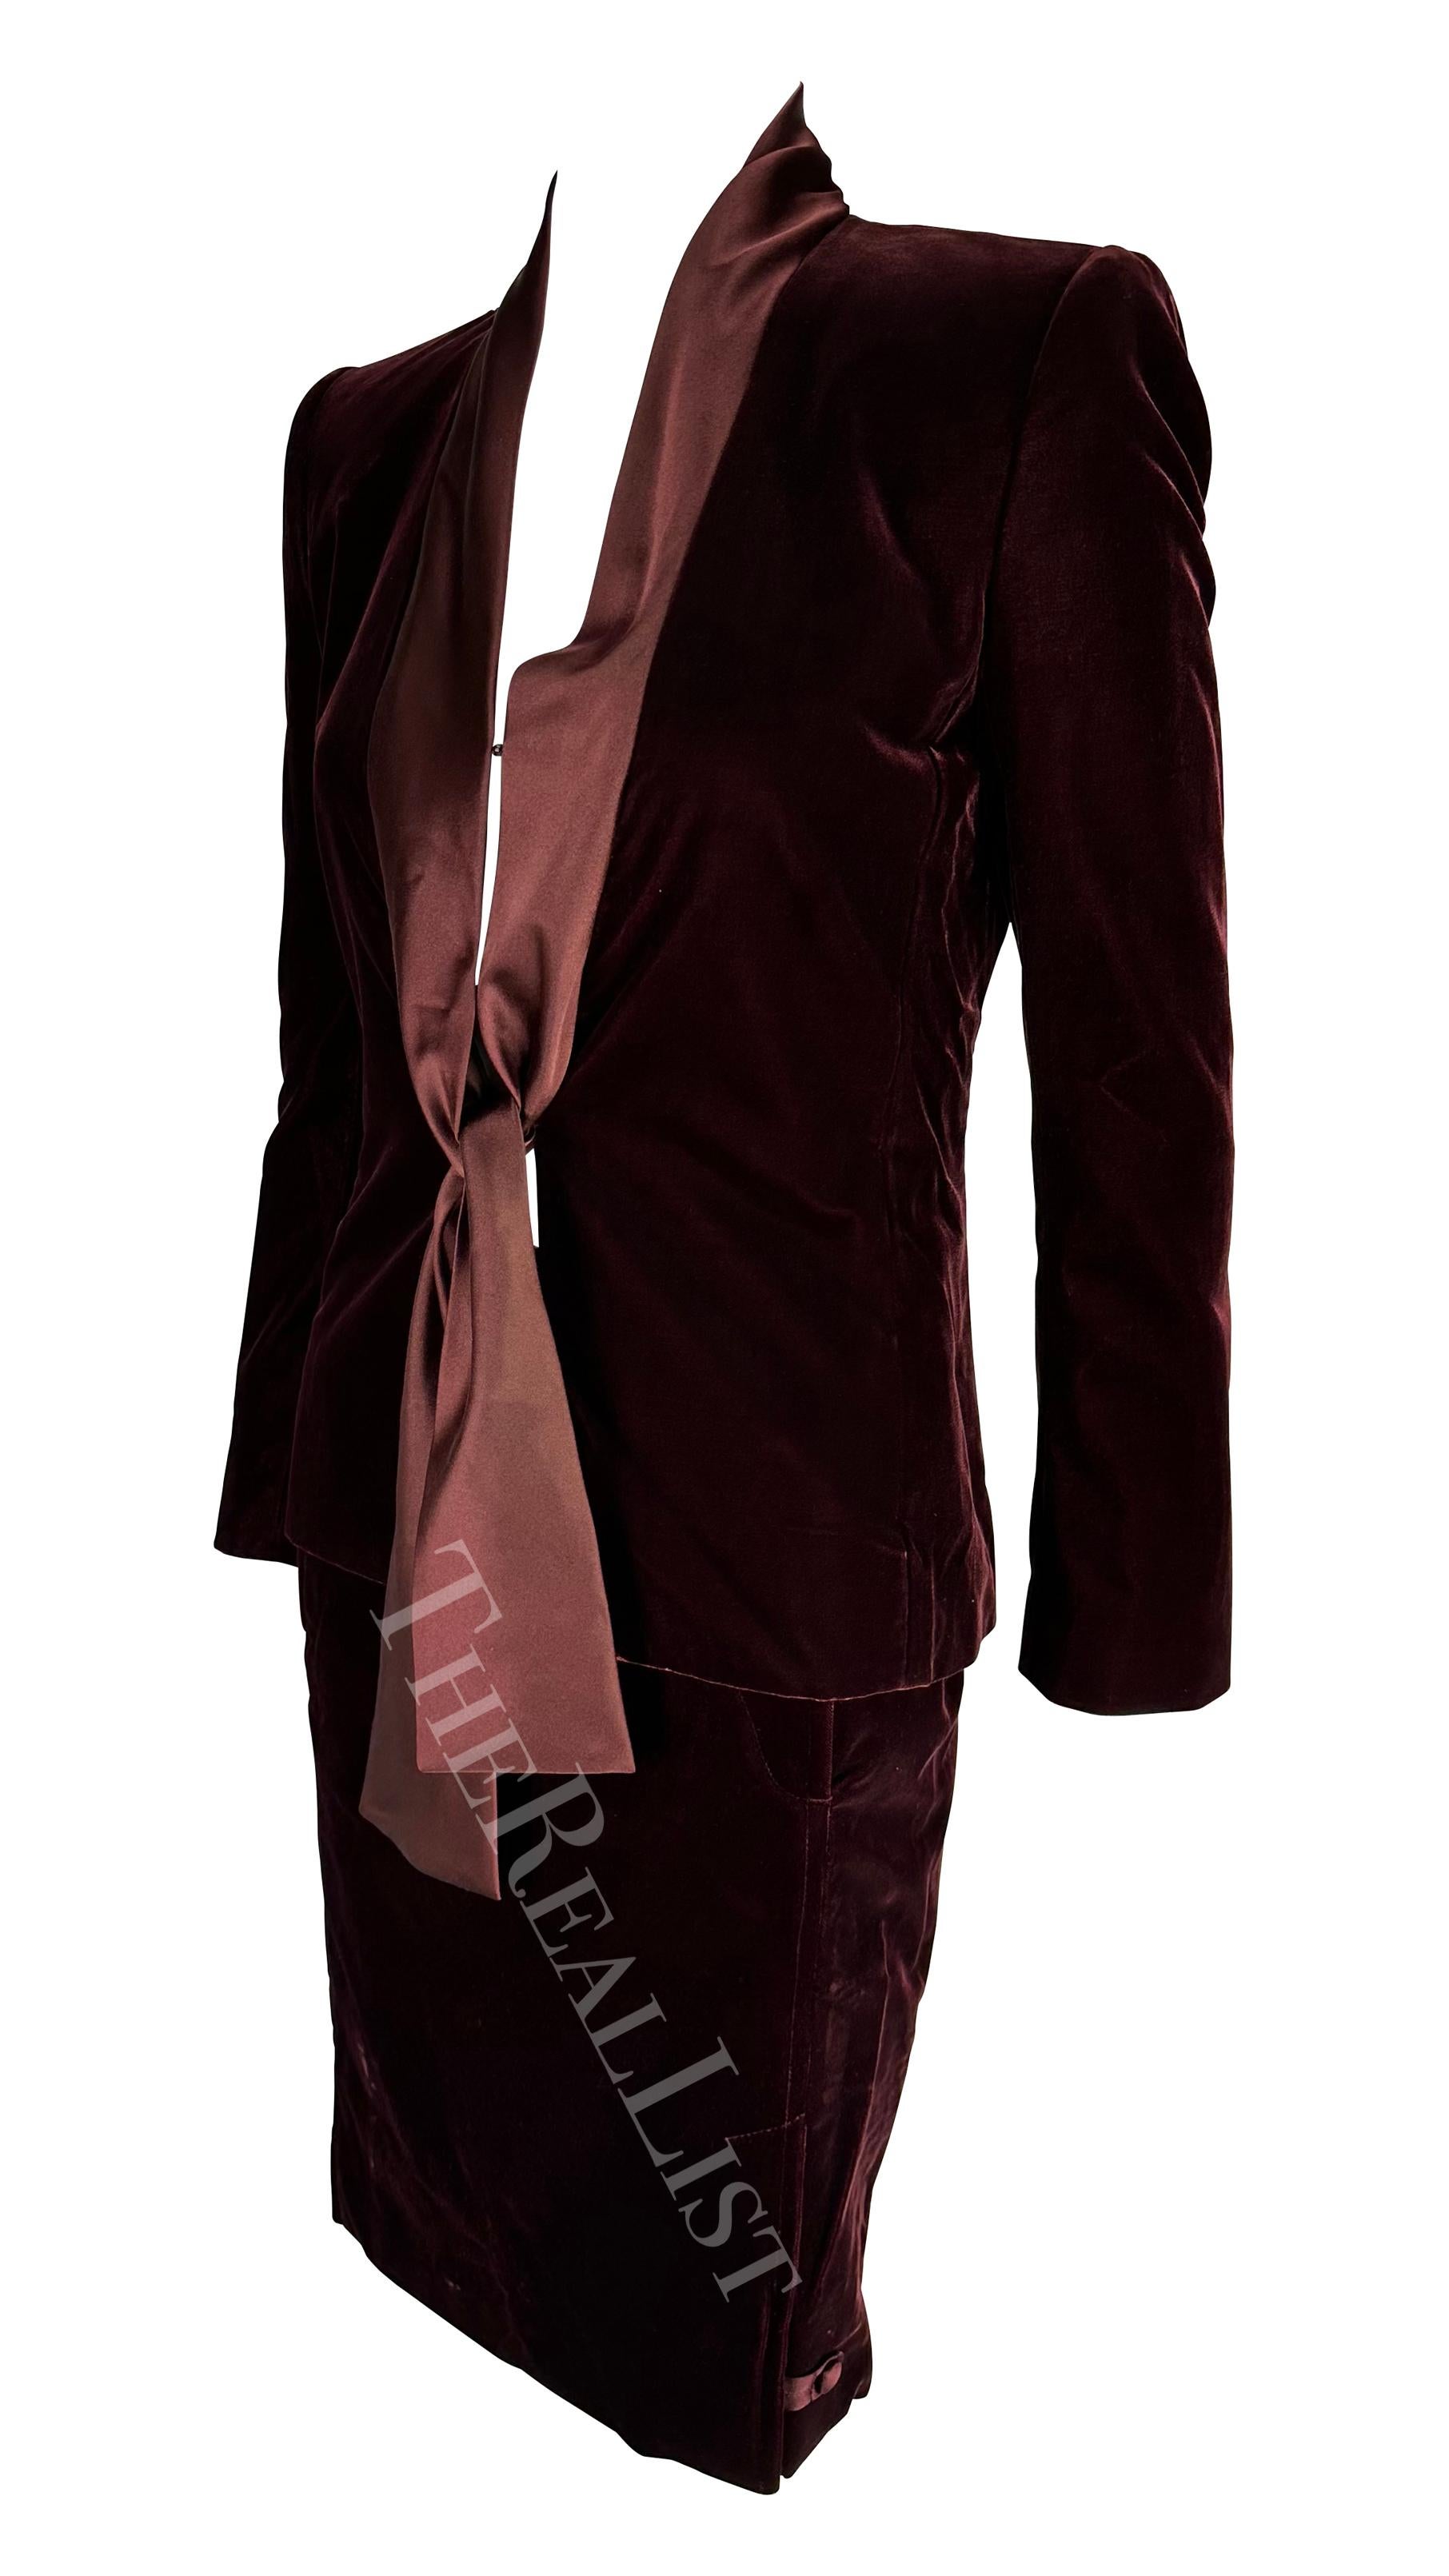 Presenting a beautiful deep red Yves Saint Laurent Rive Gauche velvet skirt suit, designed by Tom Ford. From the Fall/Winter 2004 collection, this two-piece set is comprised of a fitted jacket and matching pencil skirt. The jacket is made complete